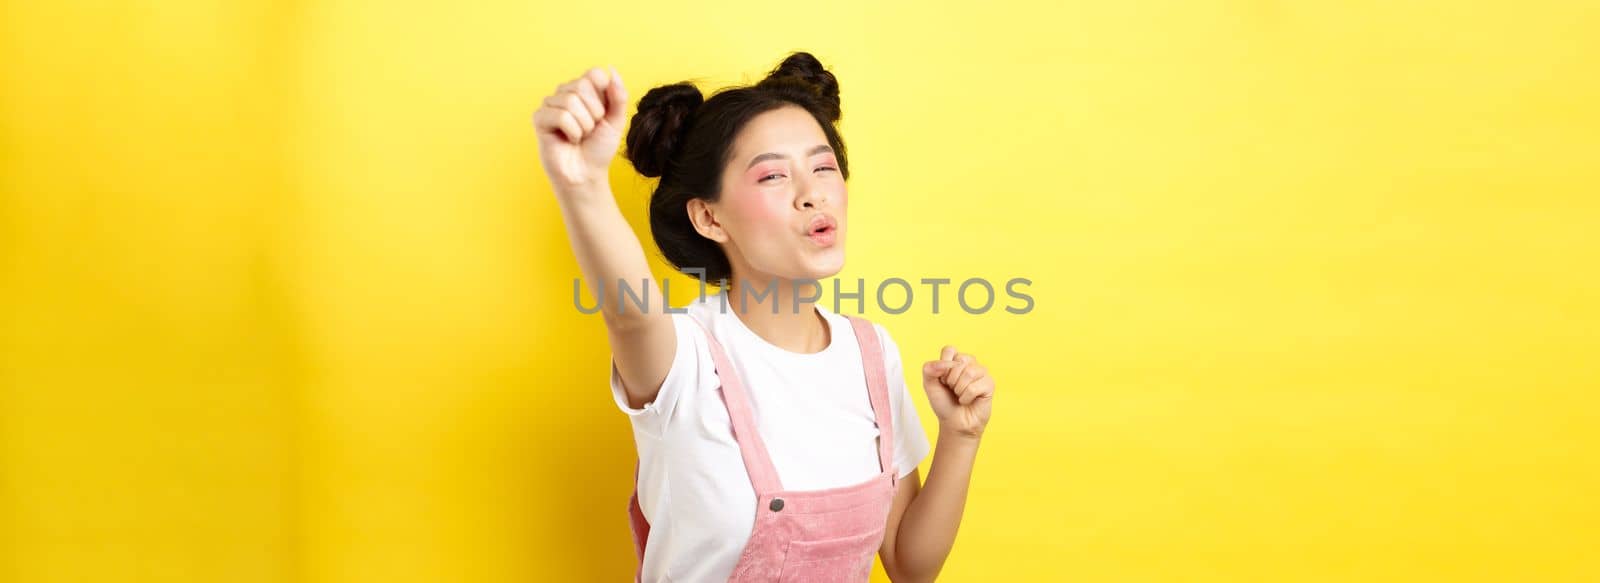 Excited asian girl looking motivated, raising hand up and chanting, cheering with joy, standing happy on yellow background.